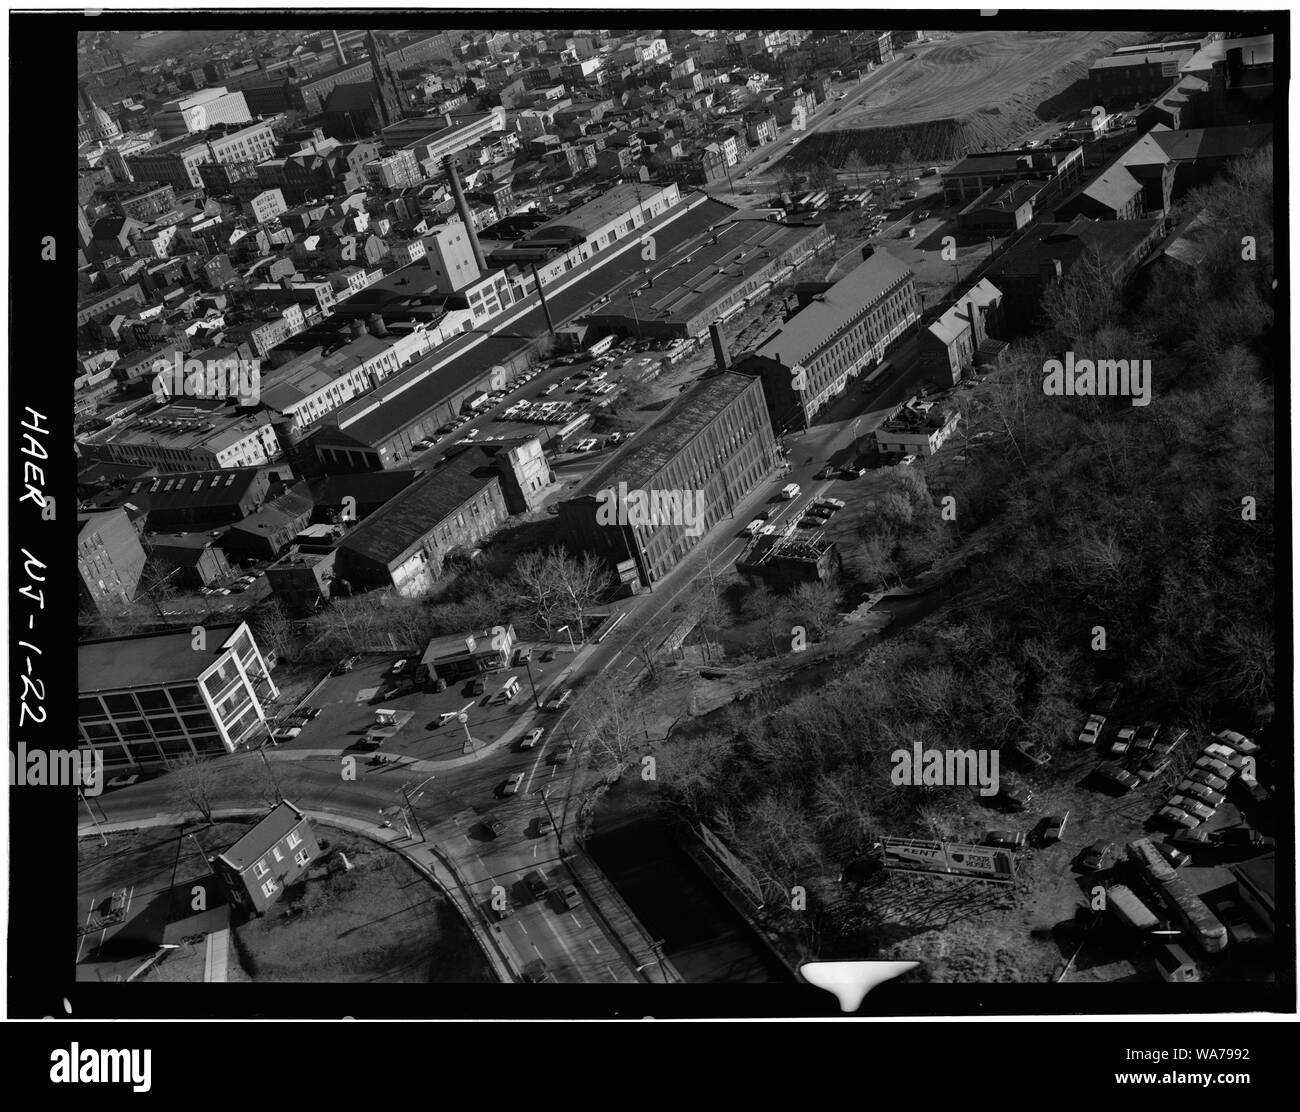 AERIAL VIEW LOOKING EAST SHOWING GRANT LOCOMOTIVE WORKS, UNION WORKS (ROSEN MILL), ROGERS LOCOMOTIVE AND MACHINE COMPANY AND IVANHOE MILL WHEELHOUSE UNDER RESTORATION. - Great Falls-S. U. M. Historic District, Oliver Street, Paterson, Passaic County, NJ Stock Photo